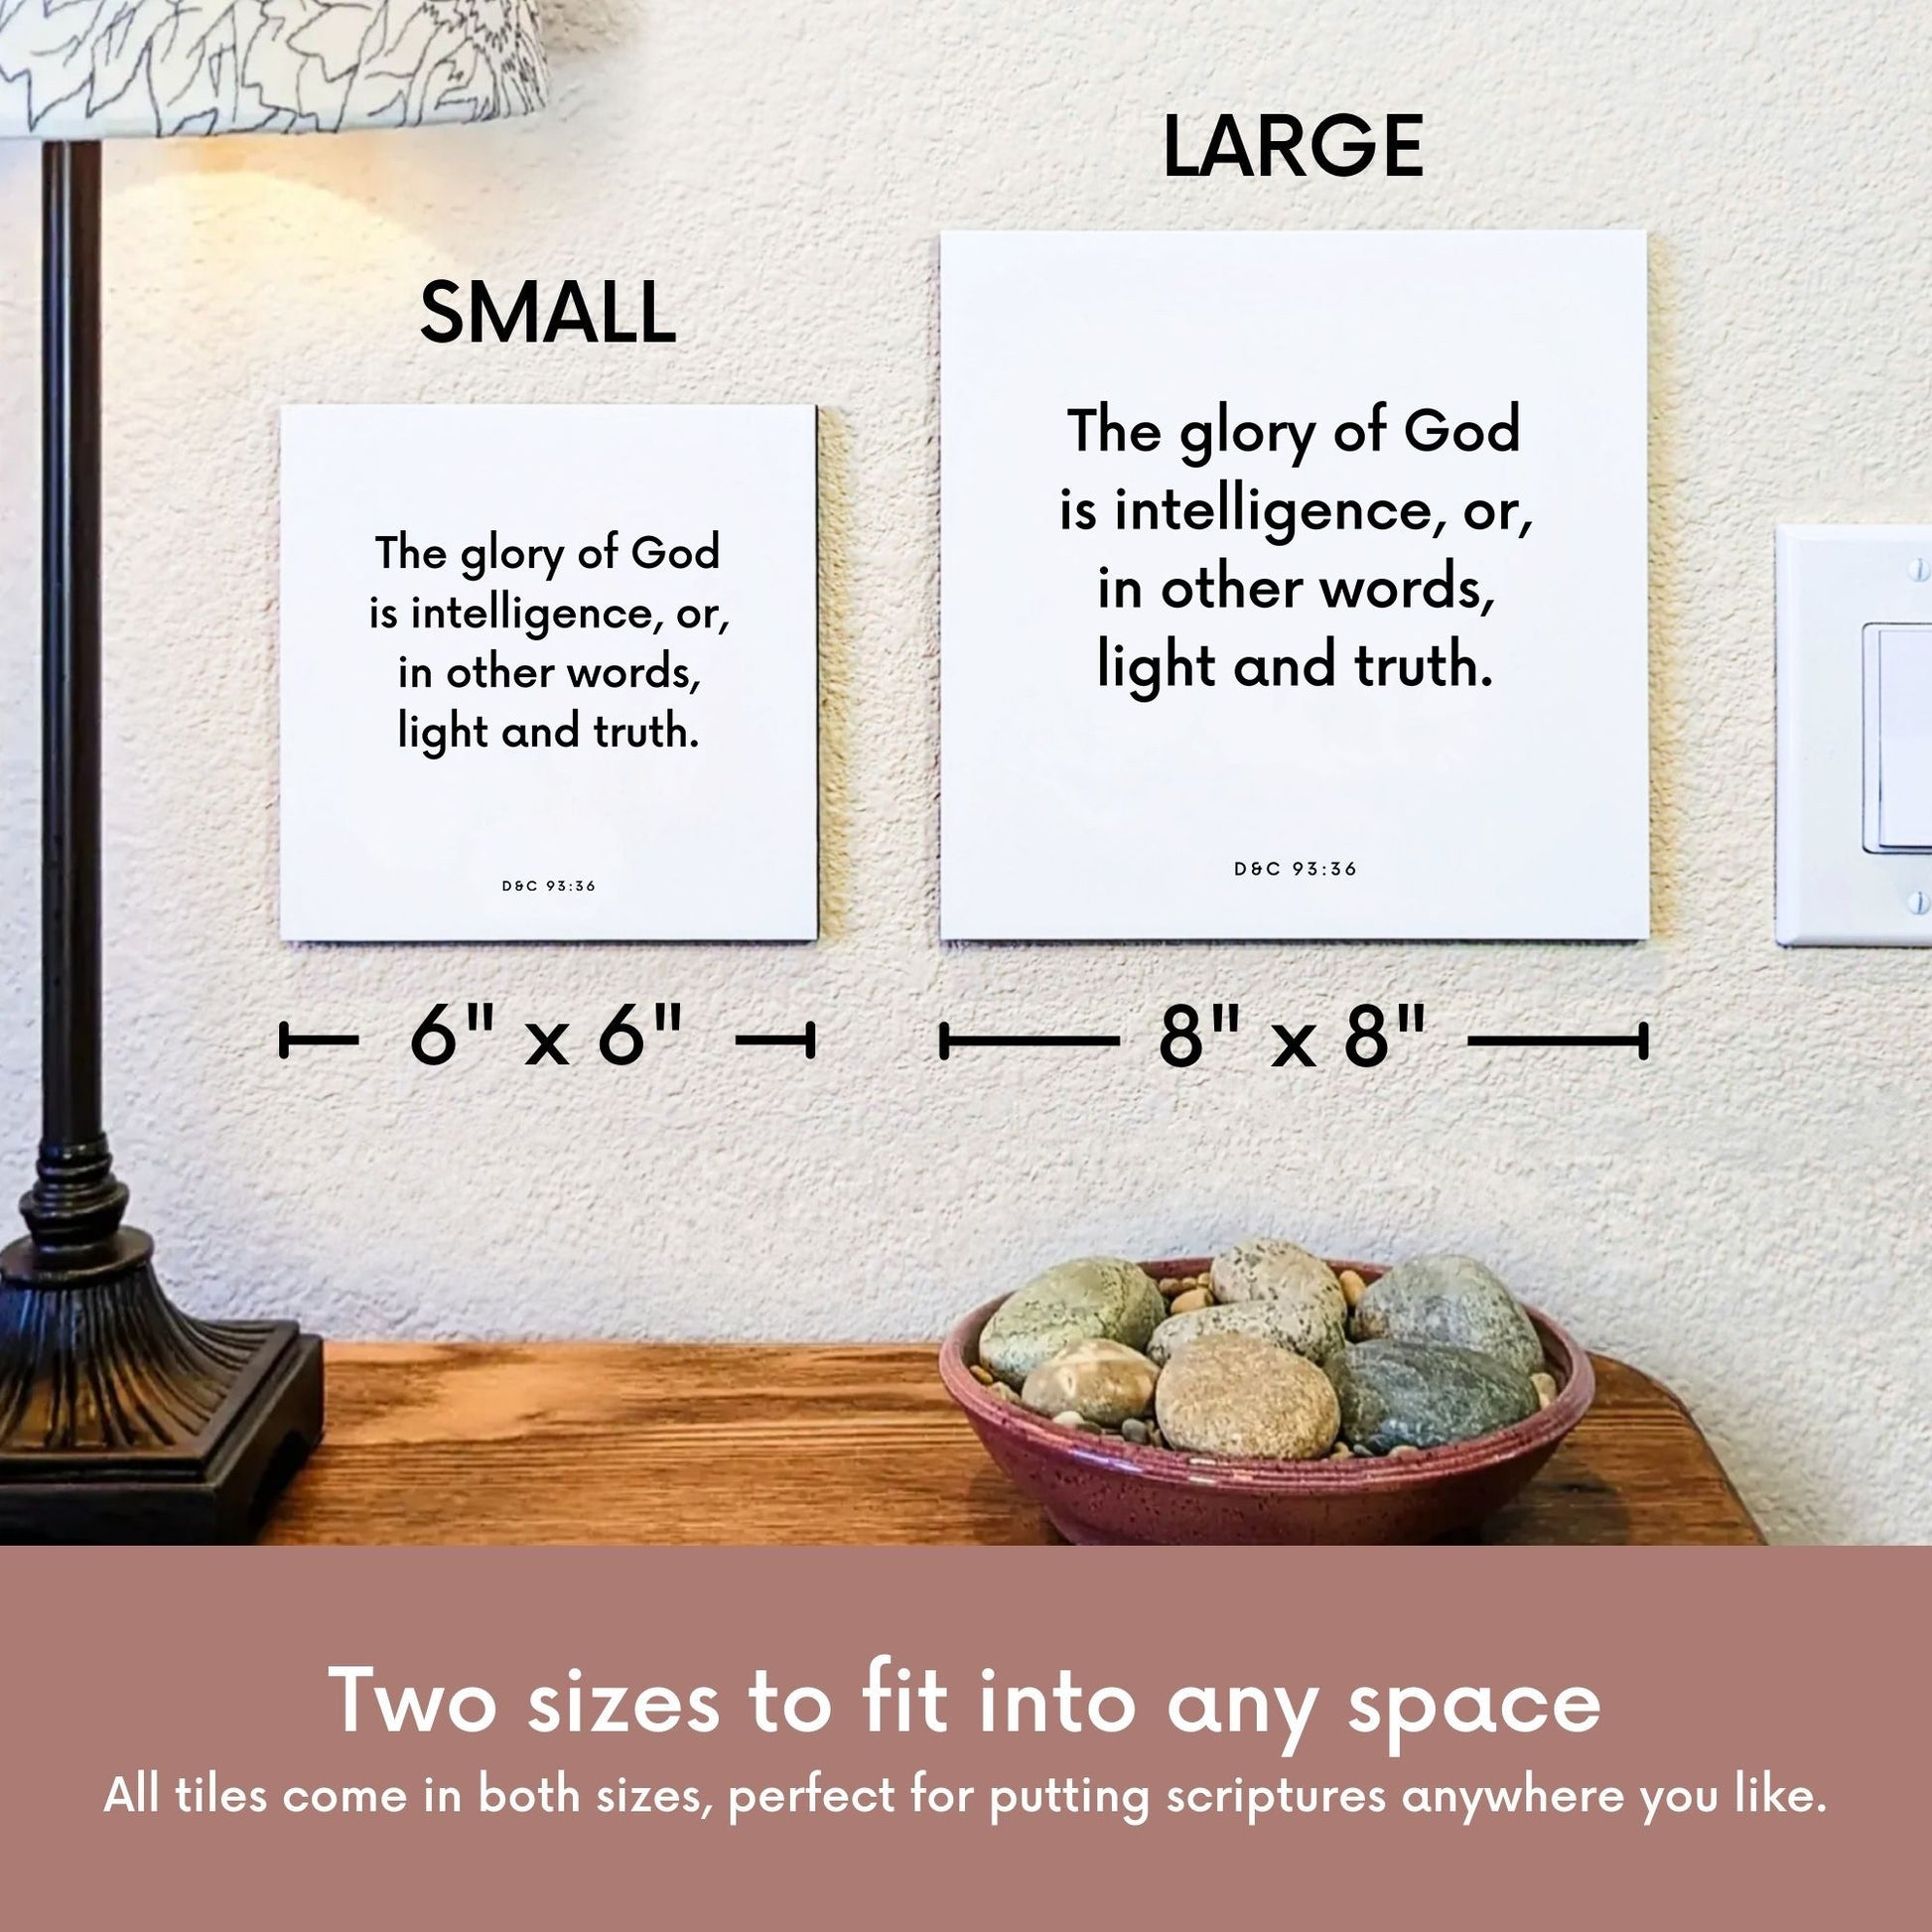 Scripture tile size comparison for D&C 93:36 - "The glory of God is intelligence"